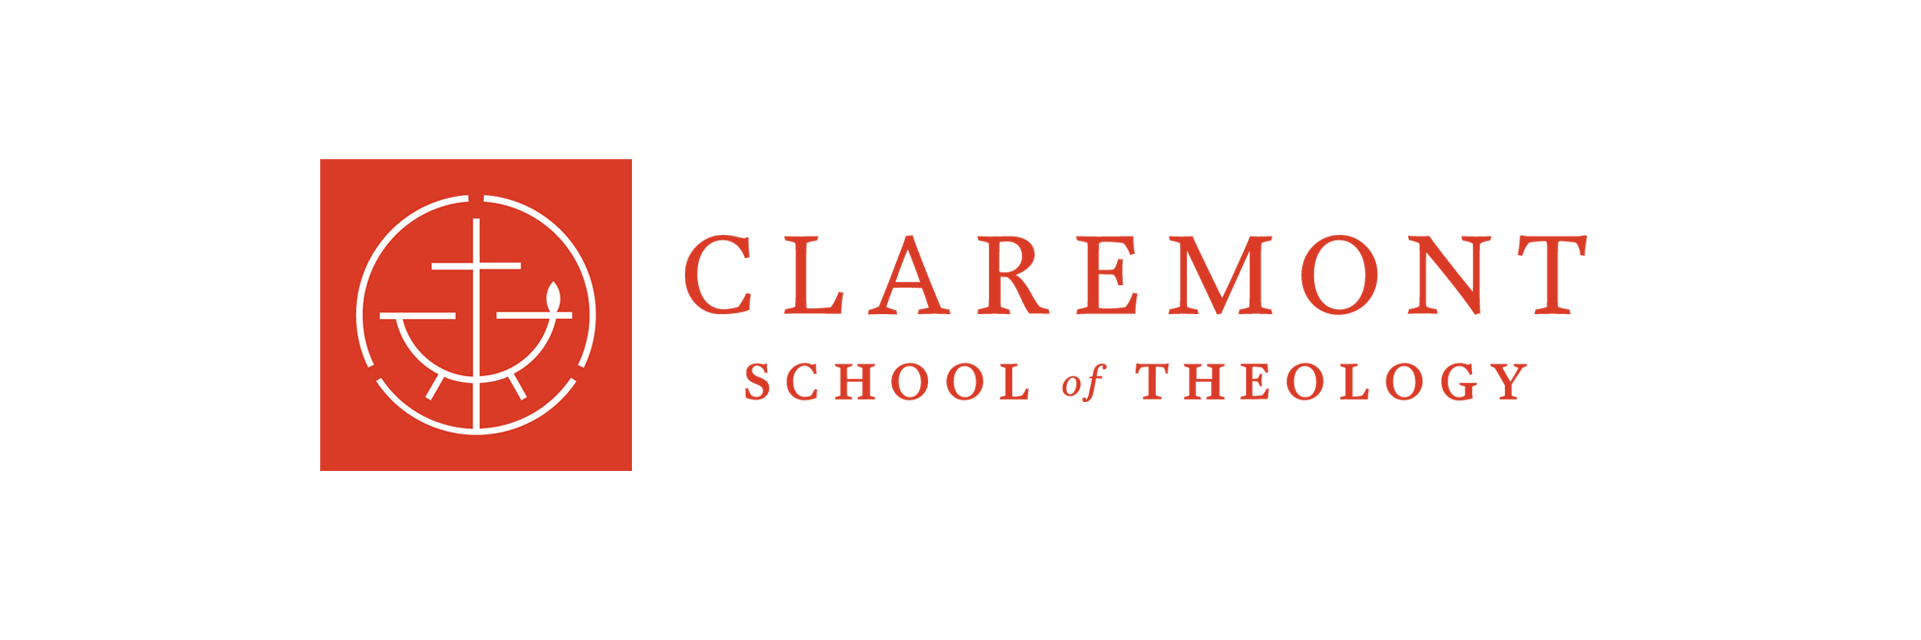 Claremont School of Theology is a Silver Tier Sponsor of the livestream for the postponed 2020 General Conference of The United Methodist Church.